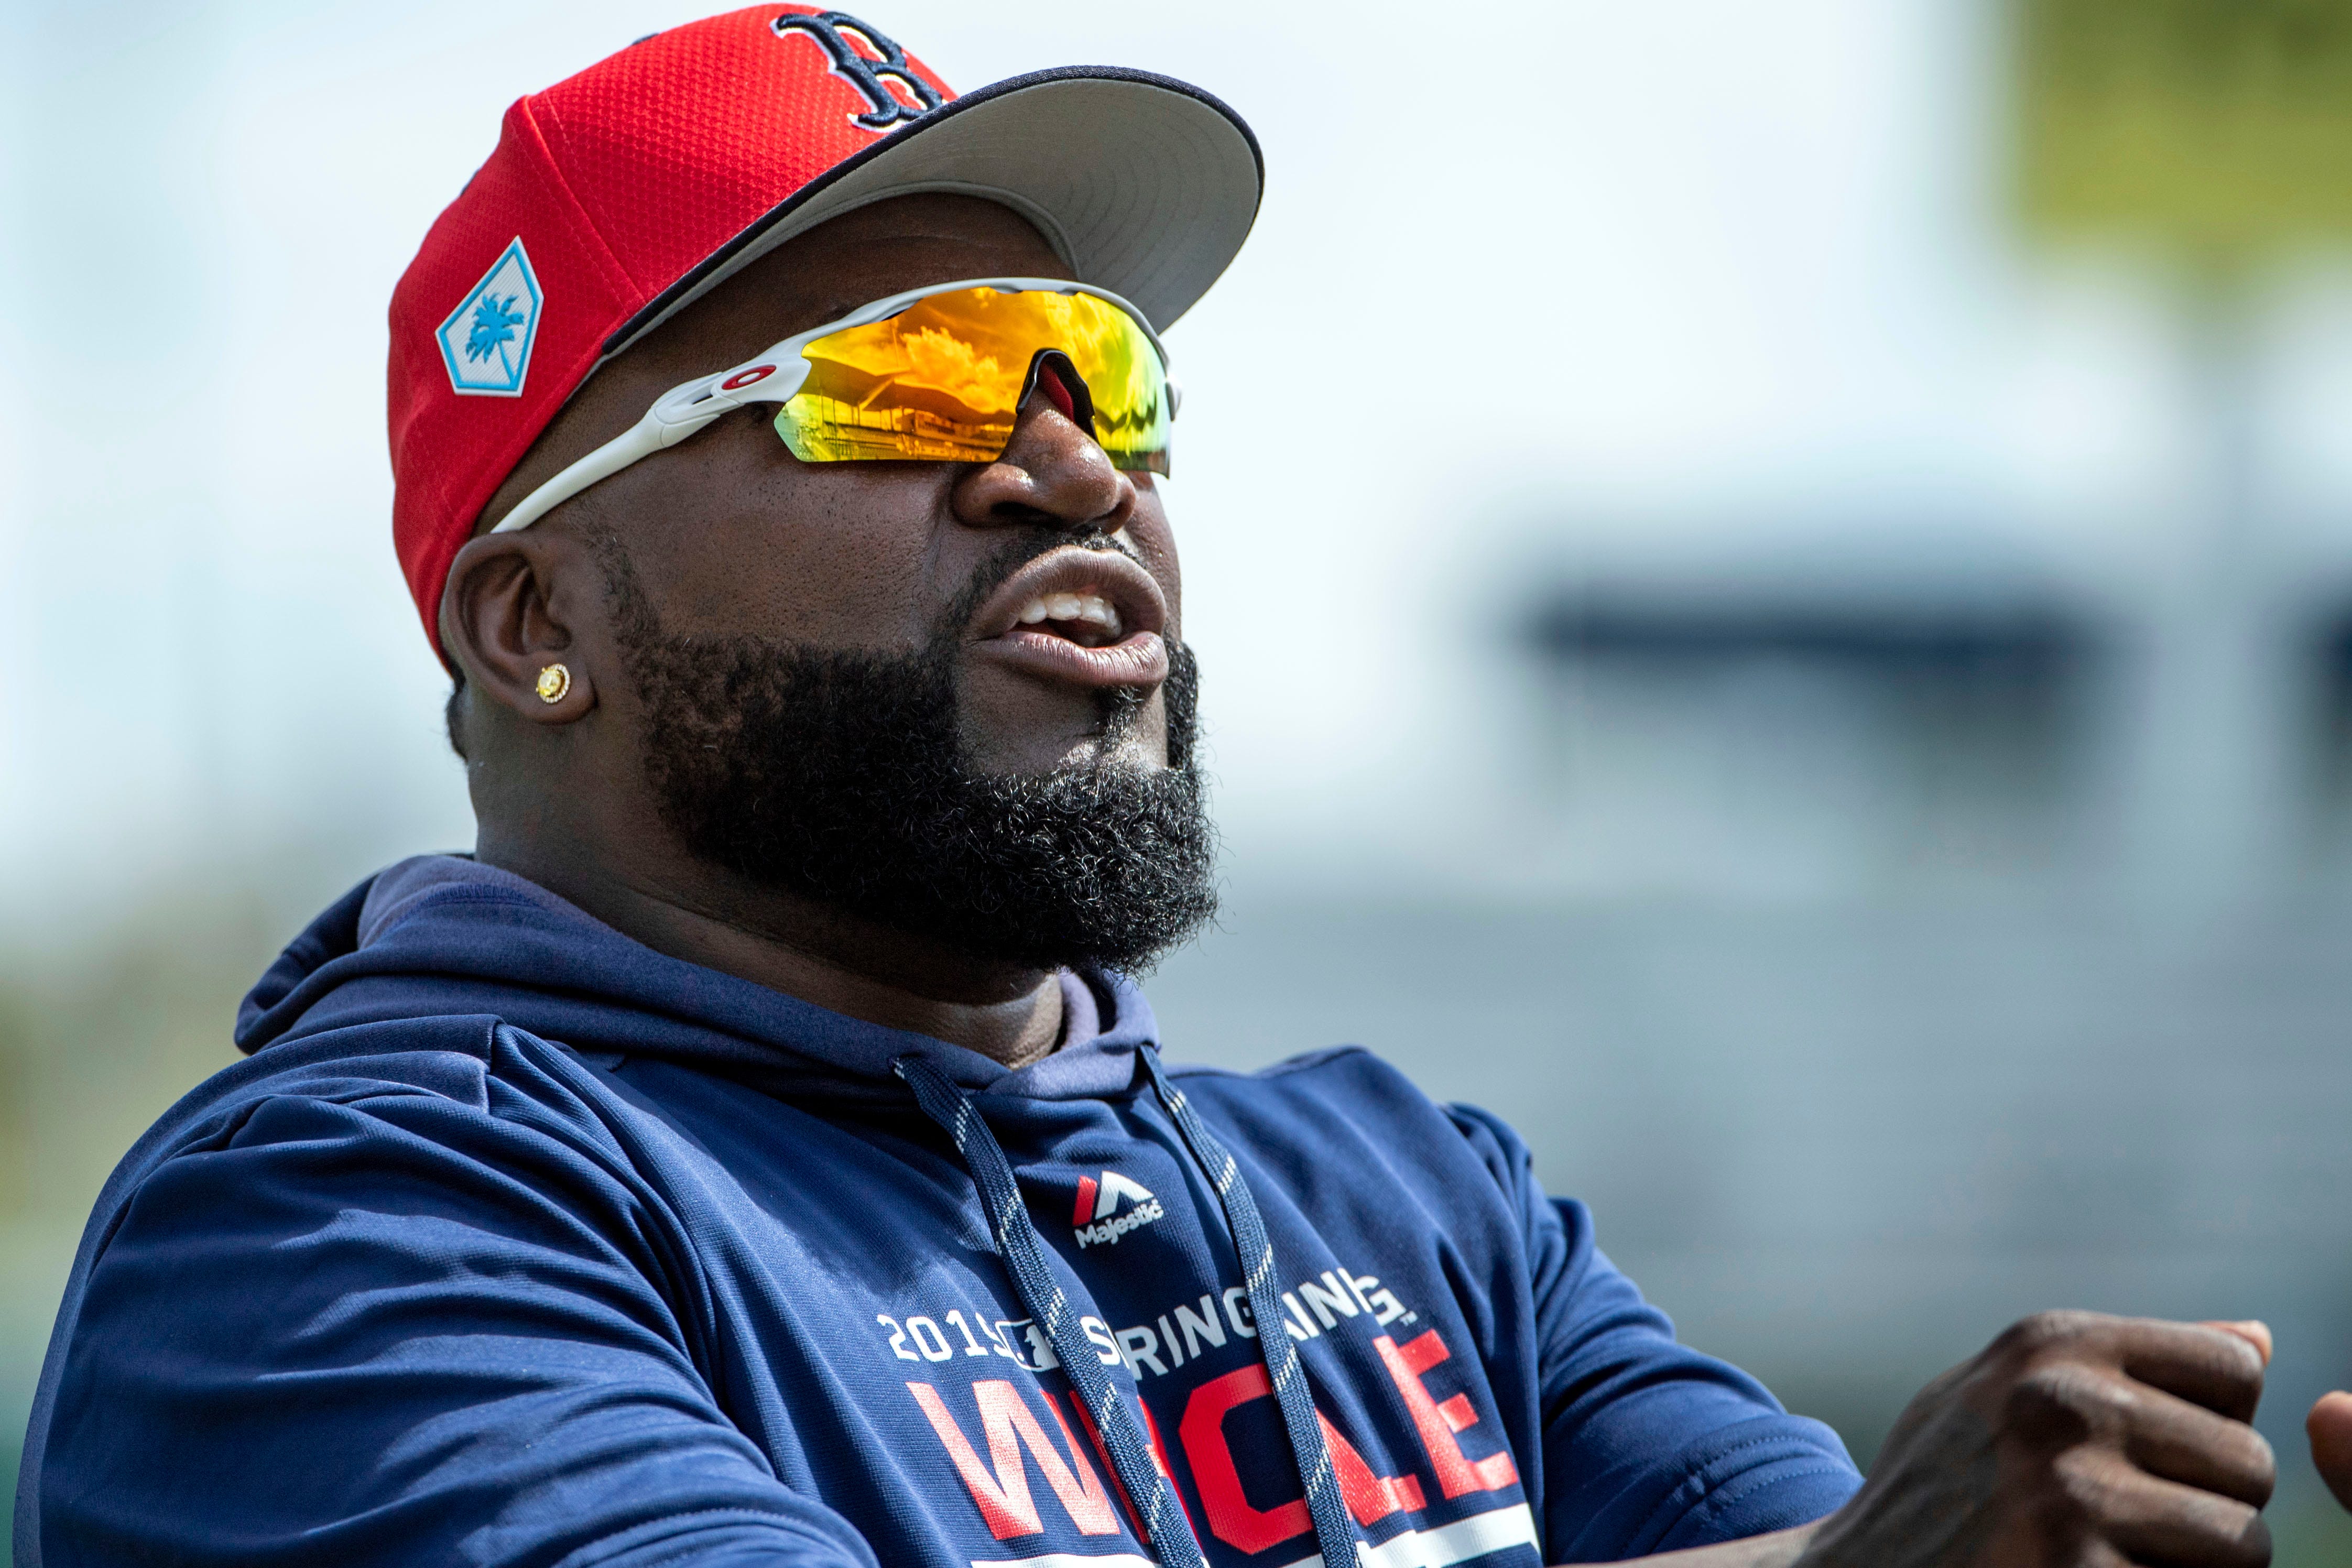 Opinion: David Ortiz's Hall of Fame election muddles argument for Barry Bonds and Roger Clemens